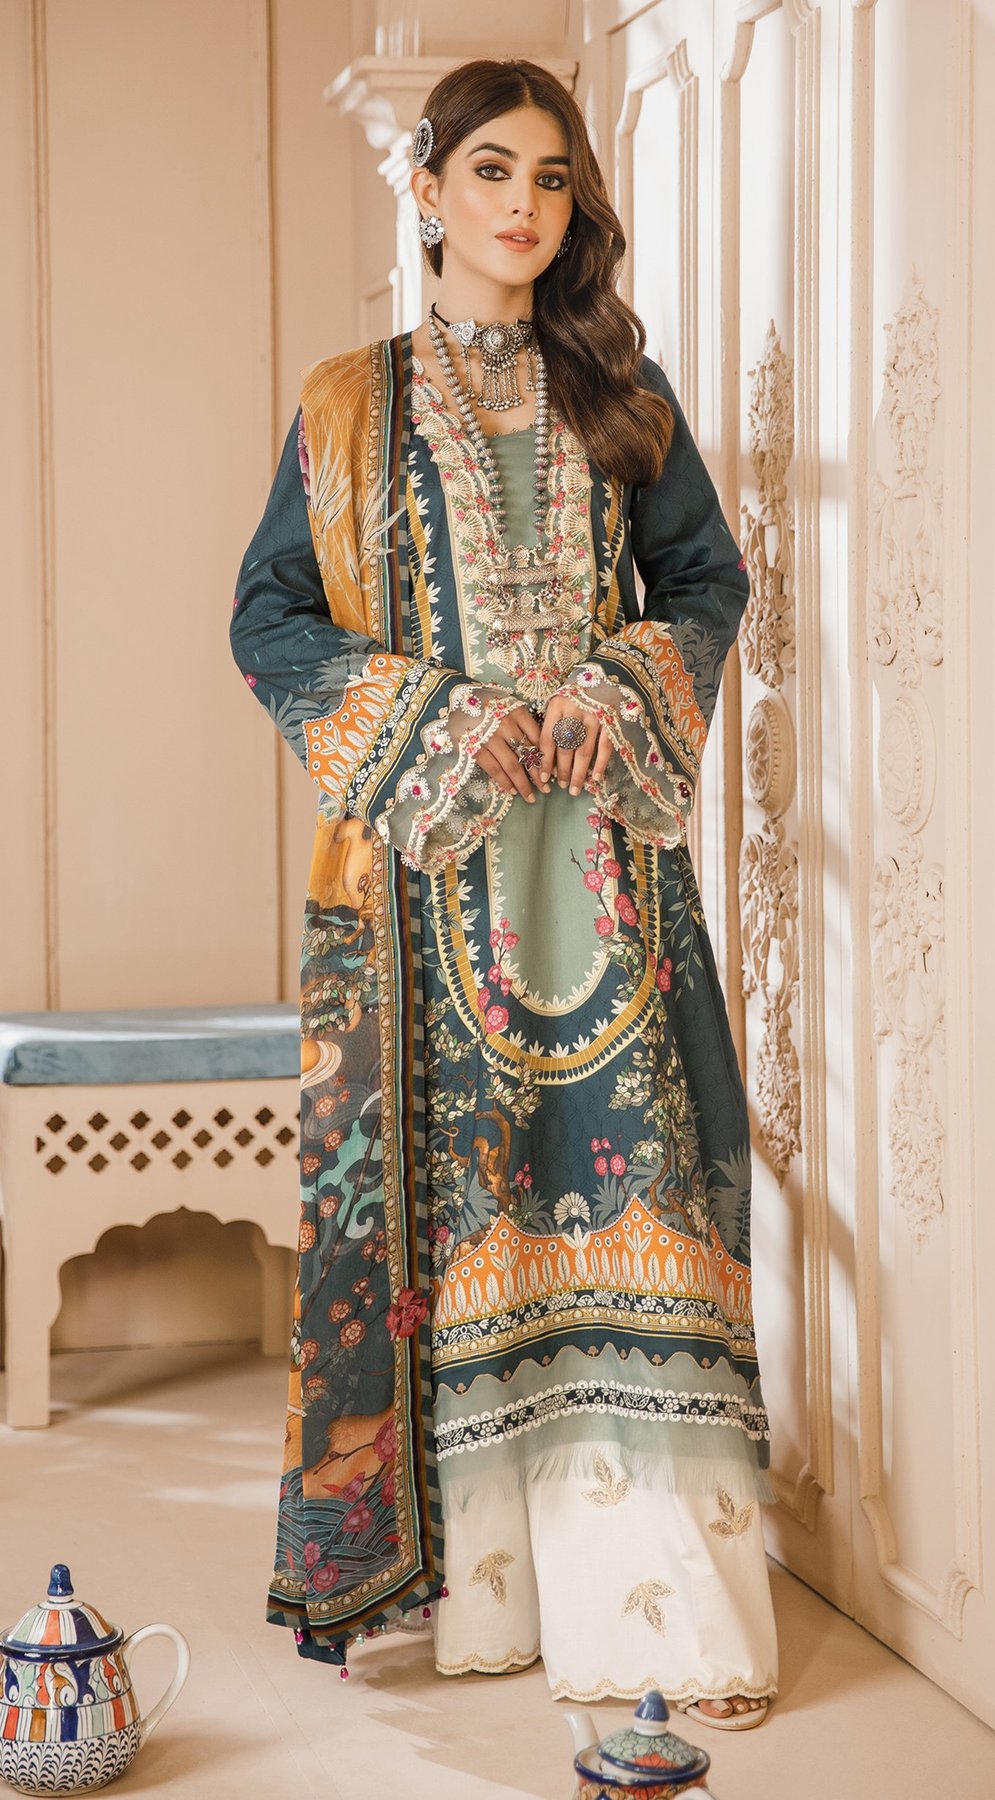 Shahzeen | Anaya by Kiran Chaudhry | Noor Bano | Unstitched Embroidered Cambric Collection'21